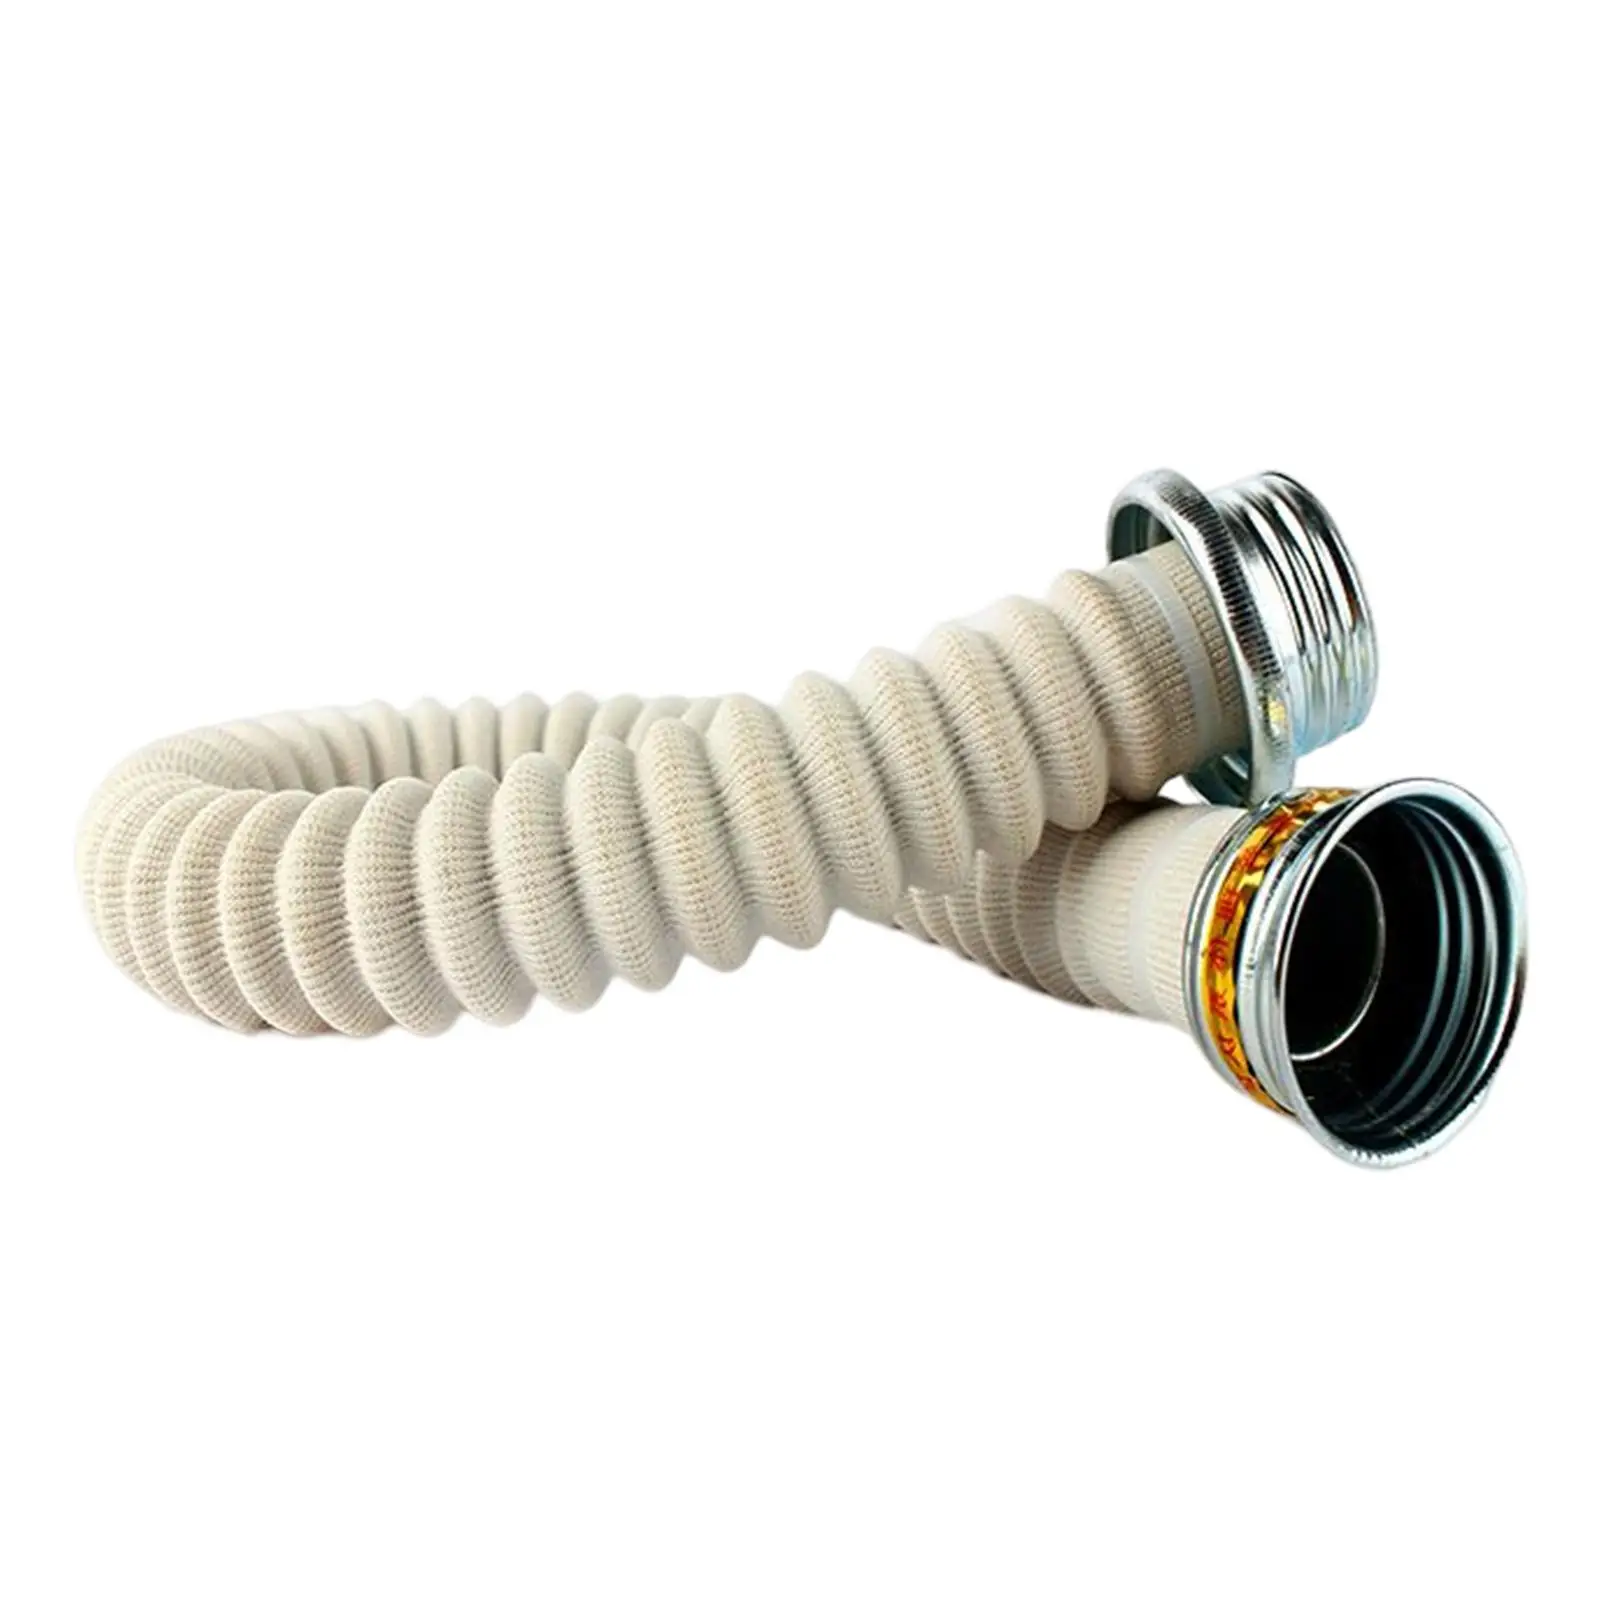 0.5M Rubber Hose Pipe ,Provides Unhindered Air Supply Tight Durable